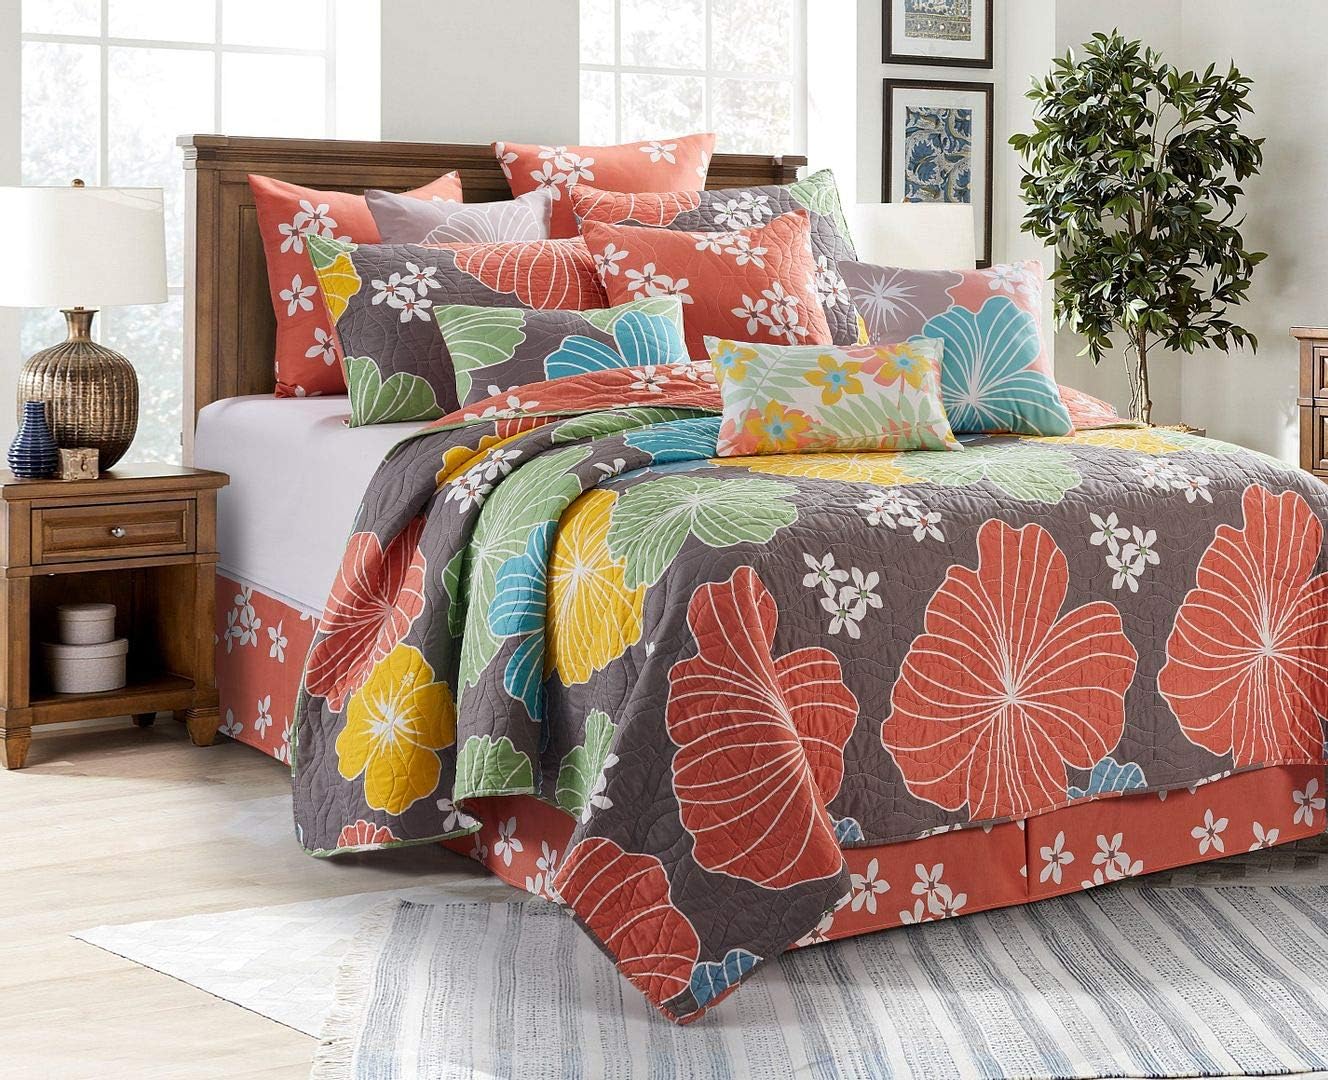 Virah Bella Quilt Bedding Set in King Hibiscus Printed Lightweight Reversible Quilt with 2 Matching Pillow Shams - Cozy & Beautiful Contemporary-Themed Bedding